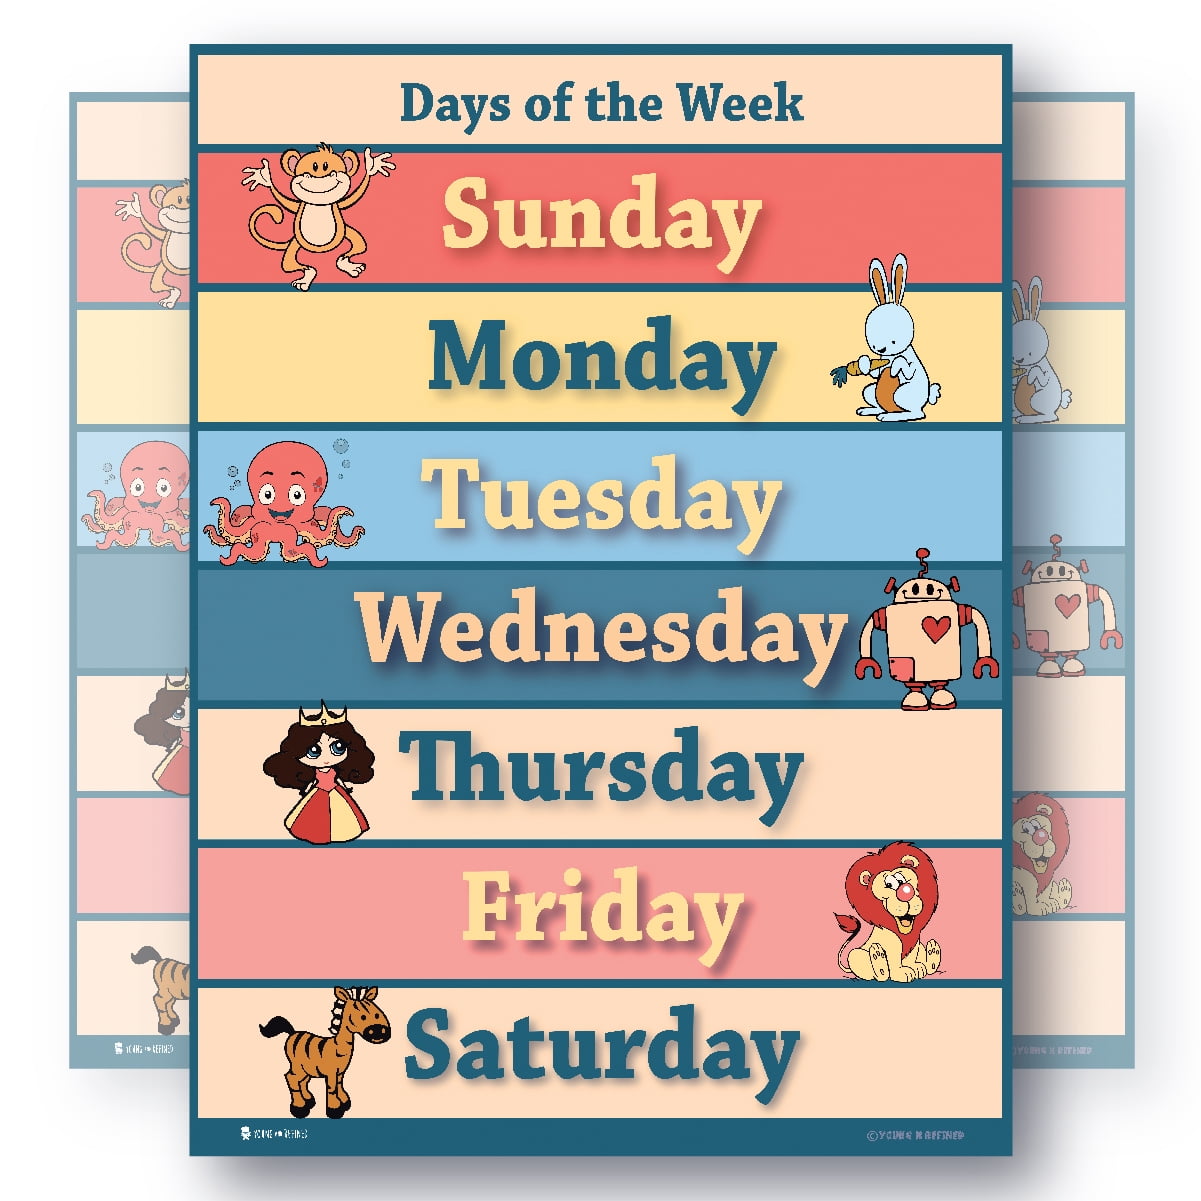 Learning days of the week LAMINATED educational SMALL poster chart for